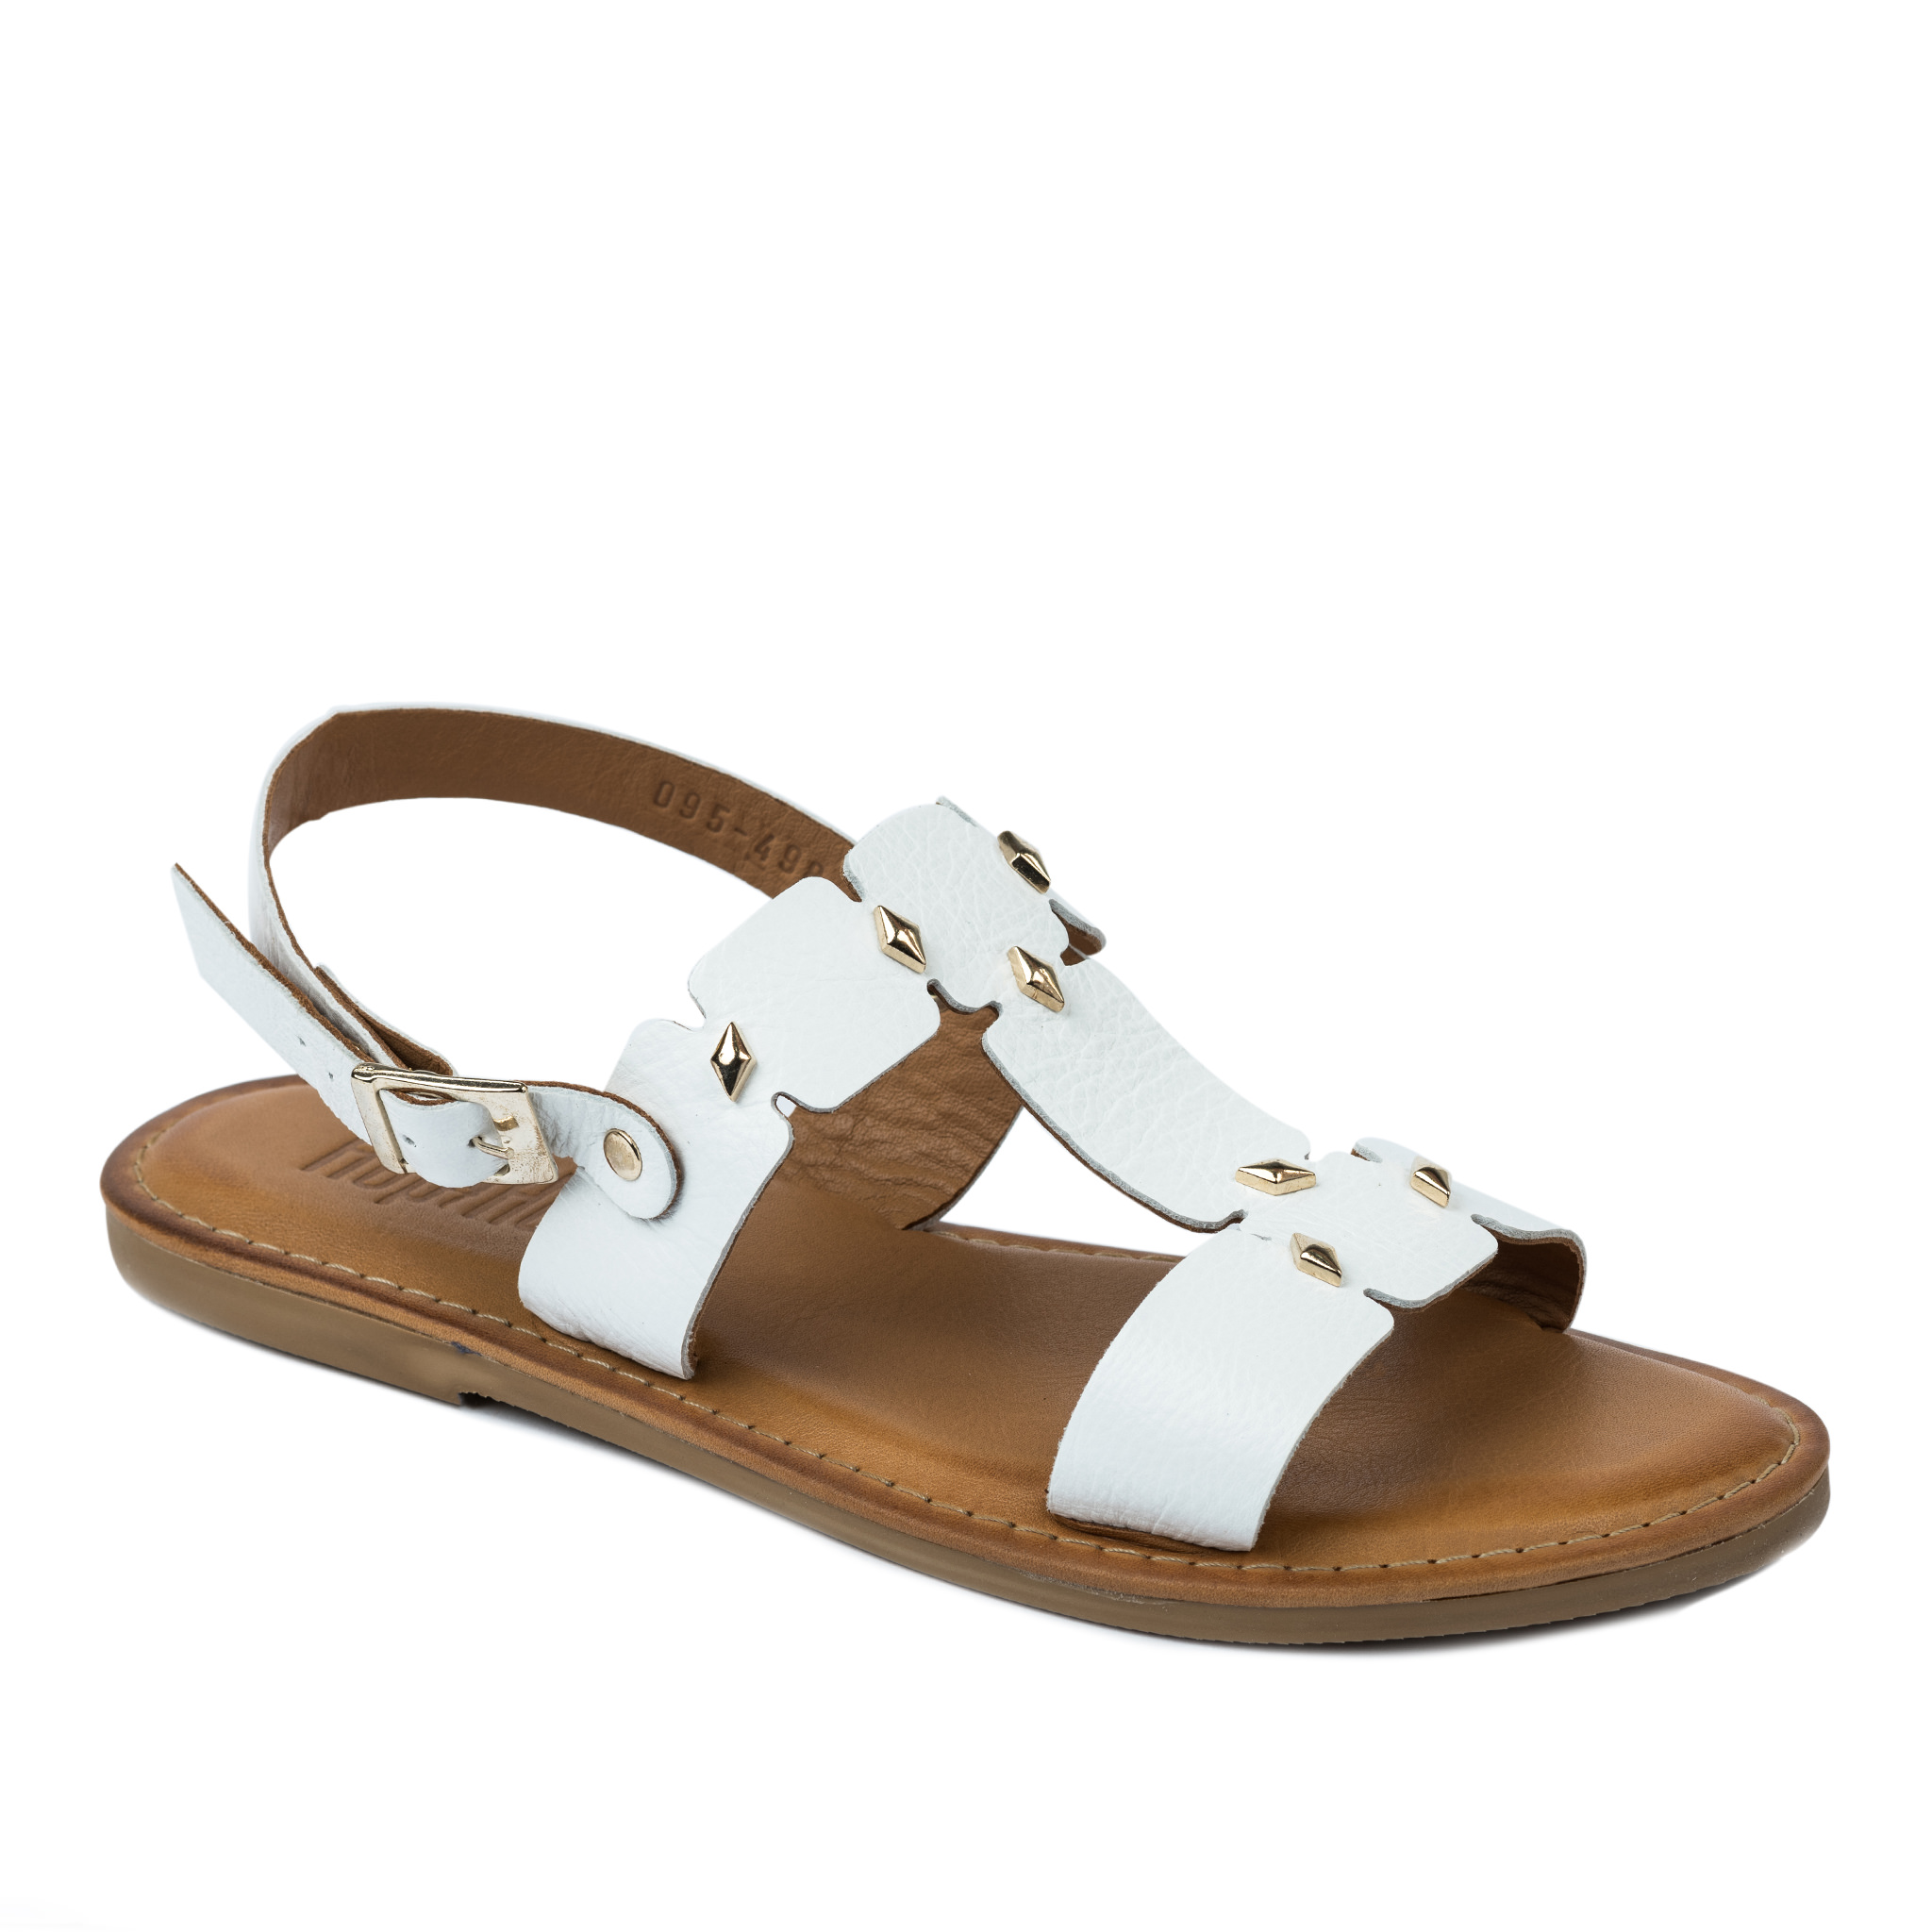 Leather sandals A685 - WHITE